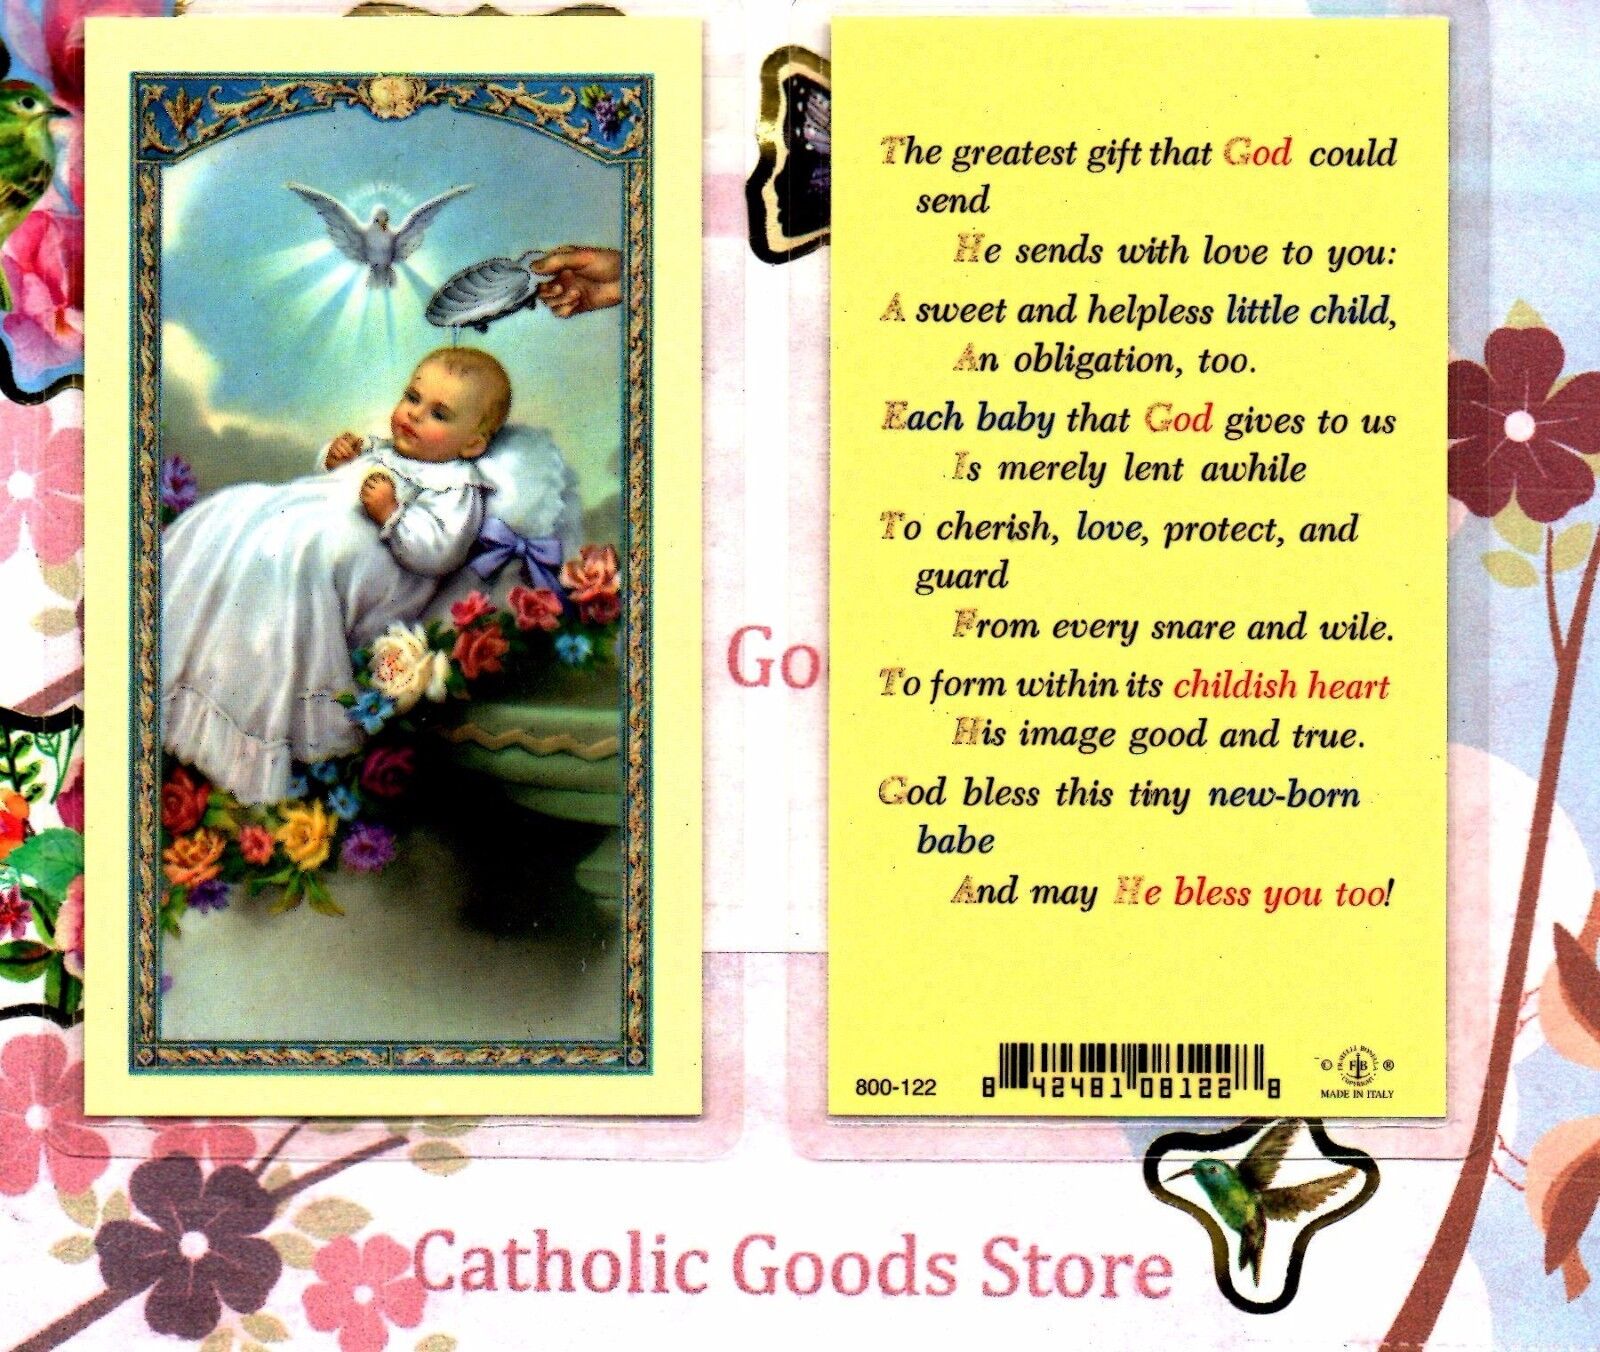 Baptism of a Baby, with The Greatest Gift - Laminated Holy Card